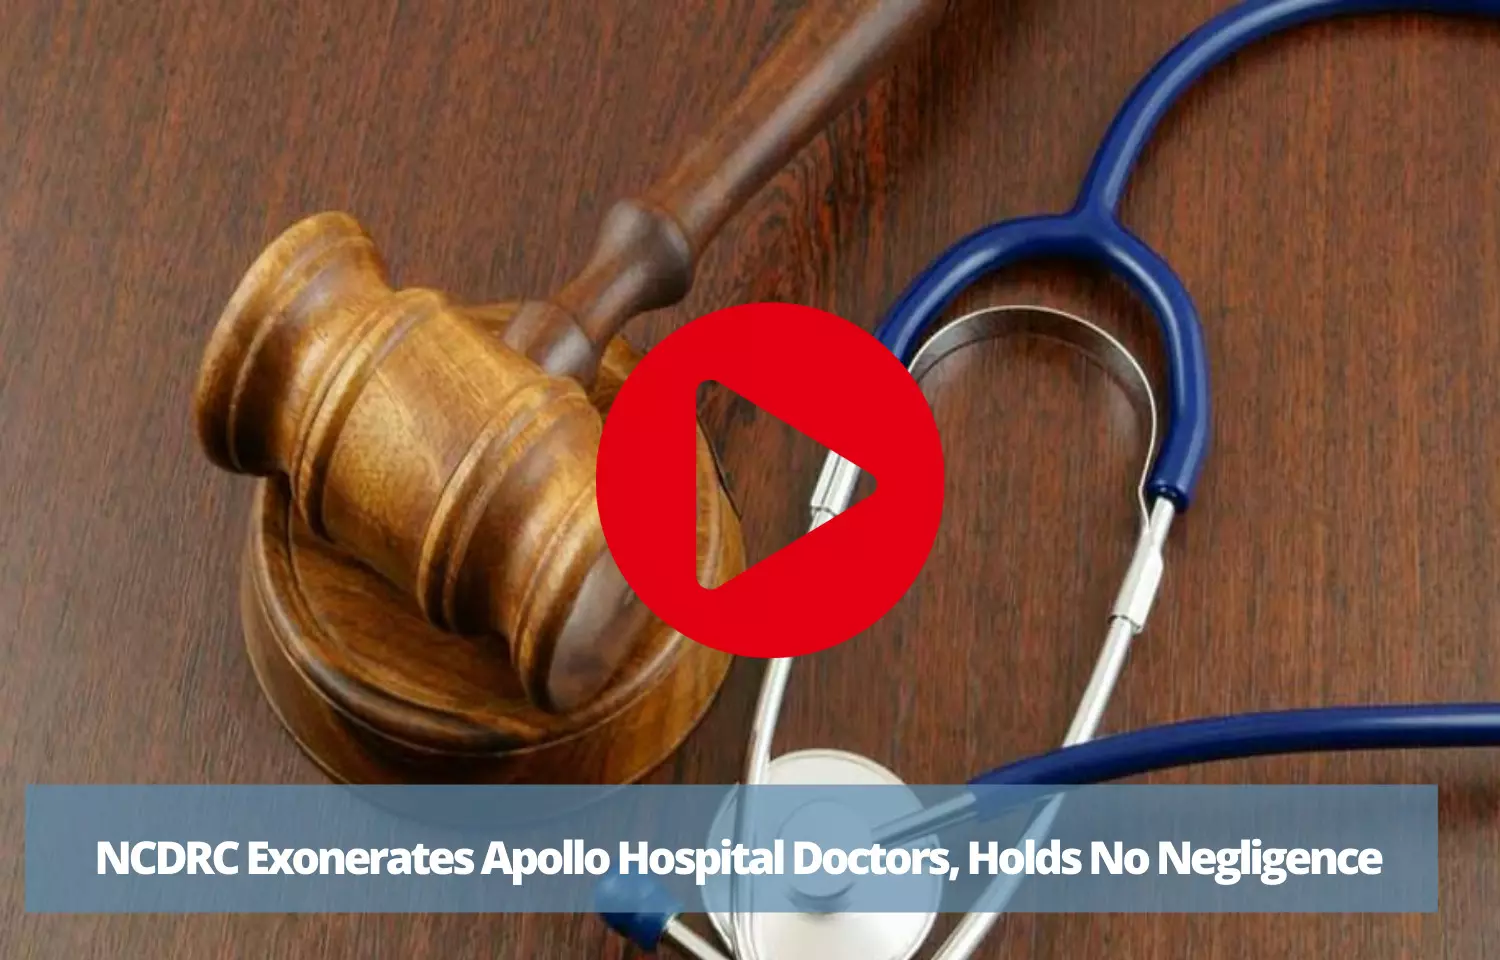 Viral Hepatitis E infection case: NCDRC exonerates Apollo Hospital doctors from medical negligence charges